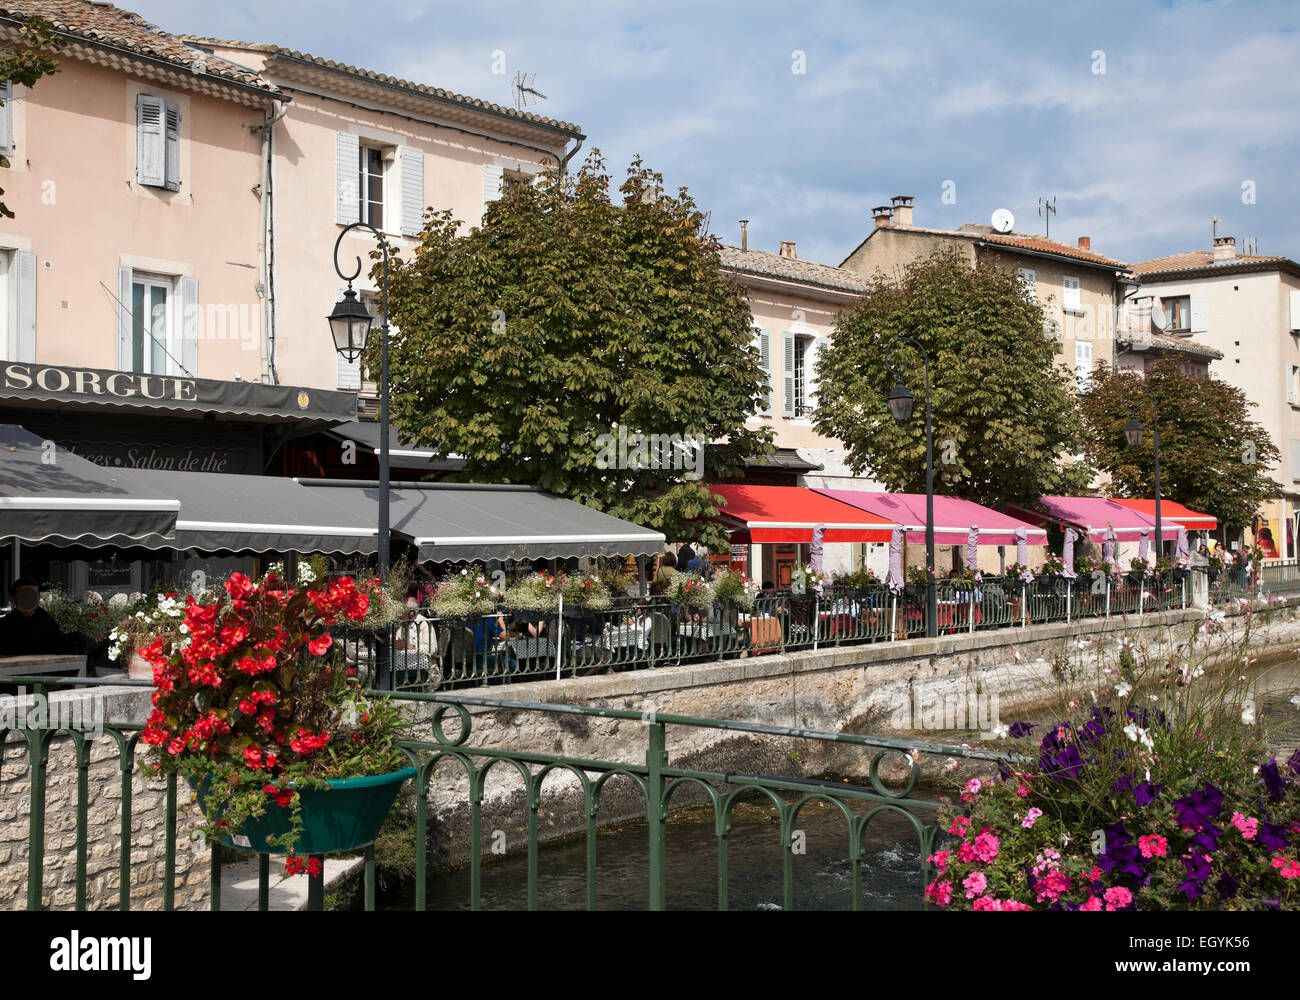 The brightly colored awnings of outdoor cafes line the edge of the Sorgue River in the heart of L'Isle-sur-la-Sorgue, Provence. Stock Photo